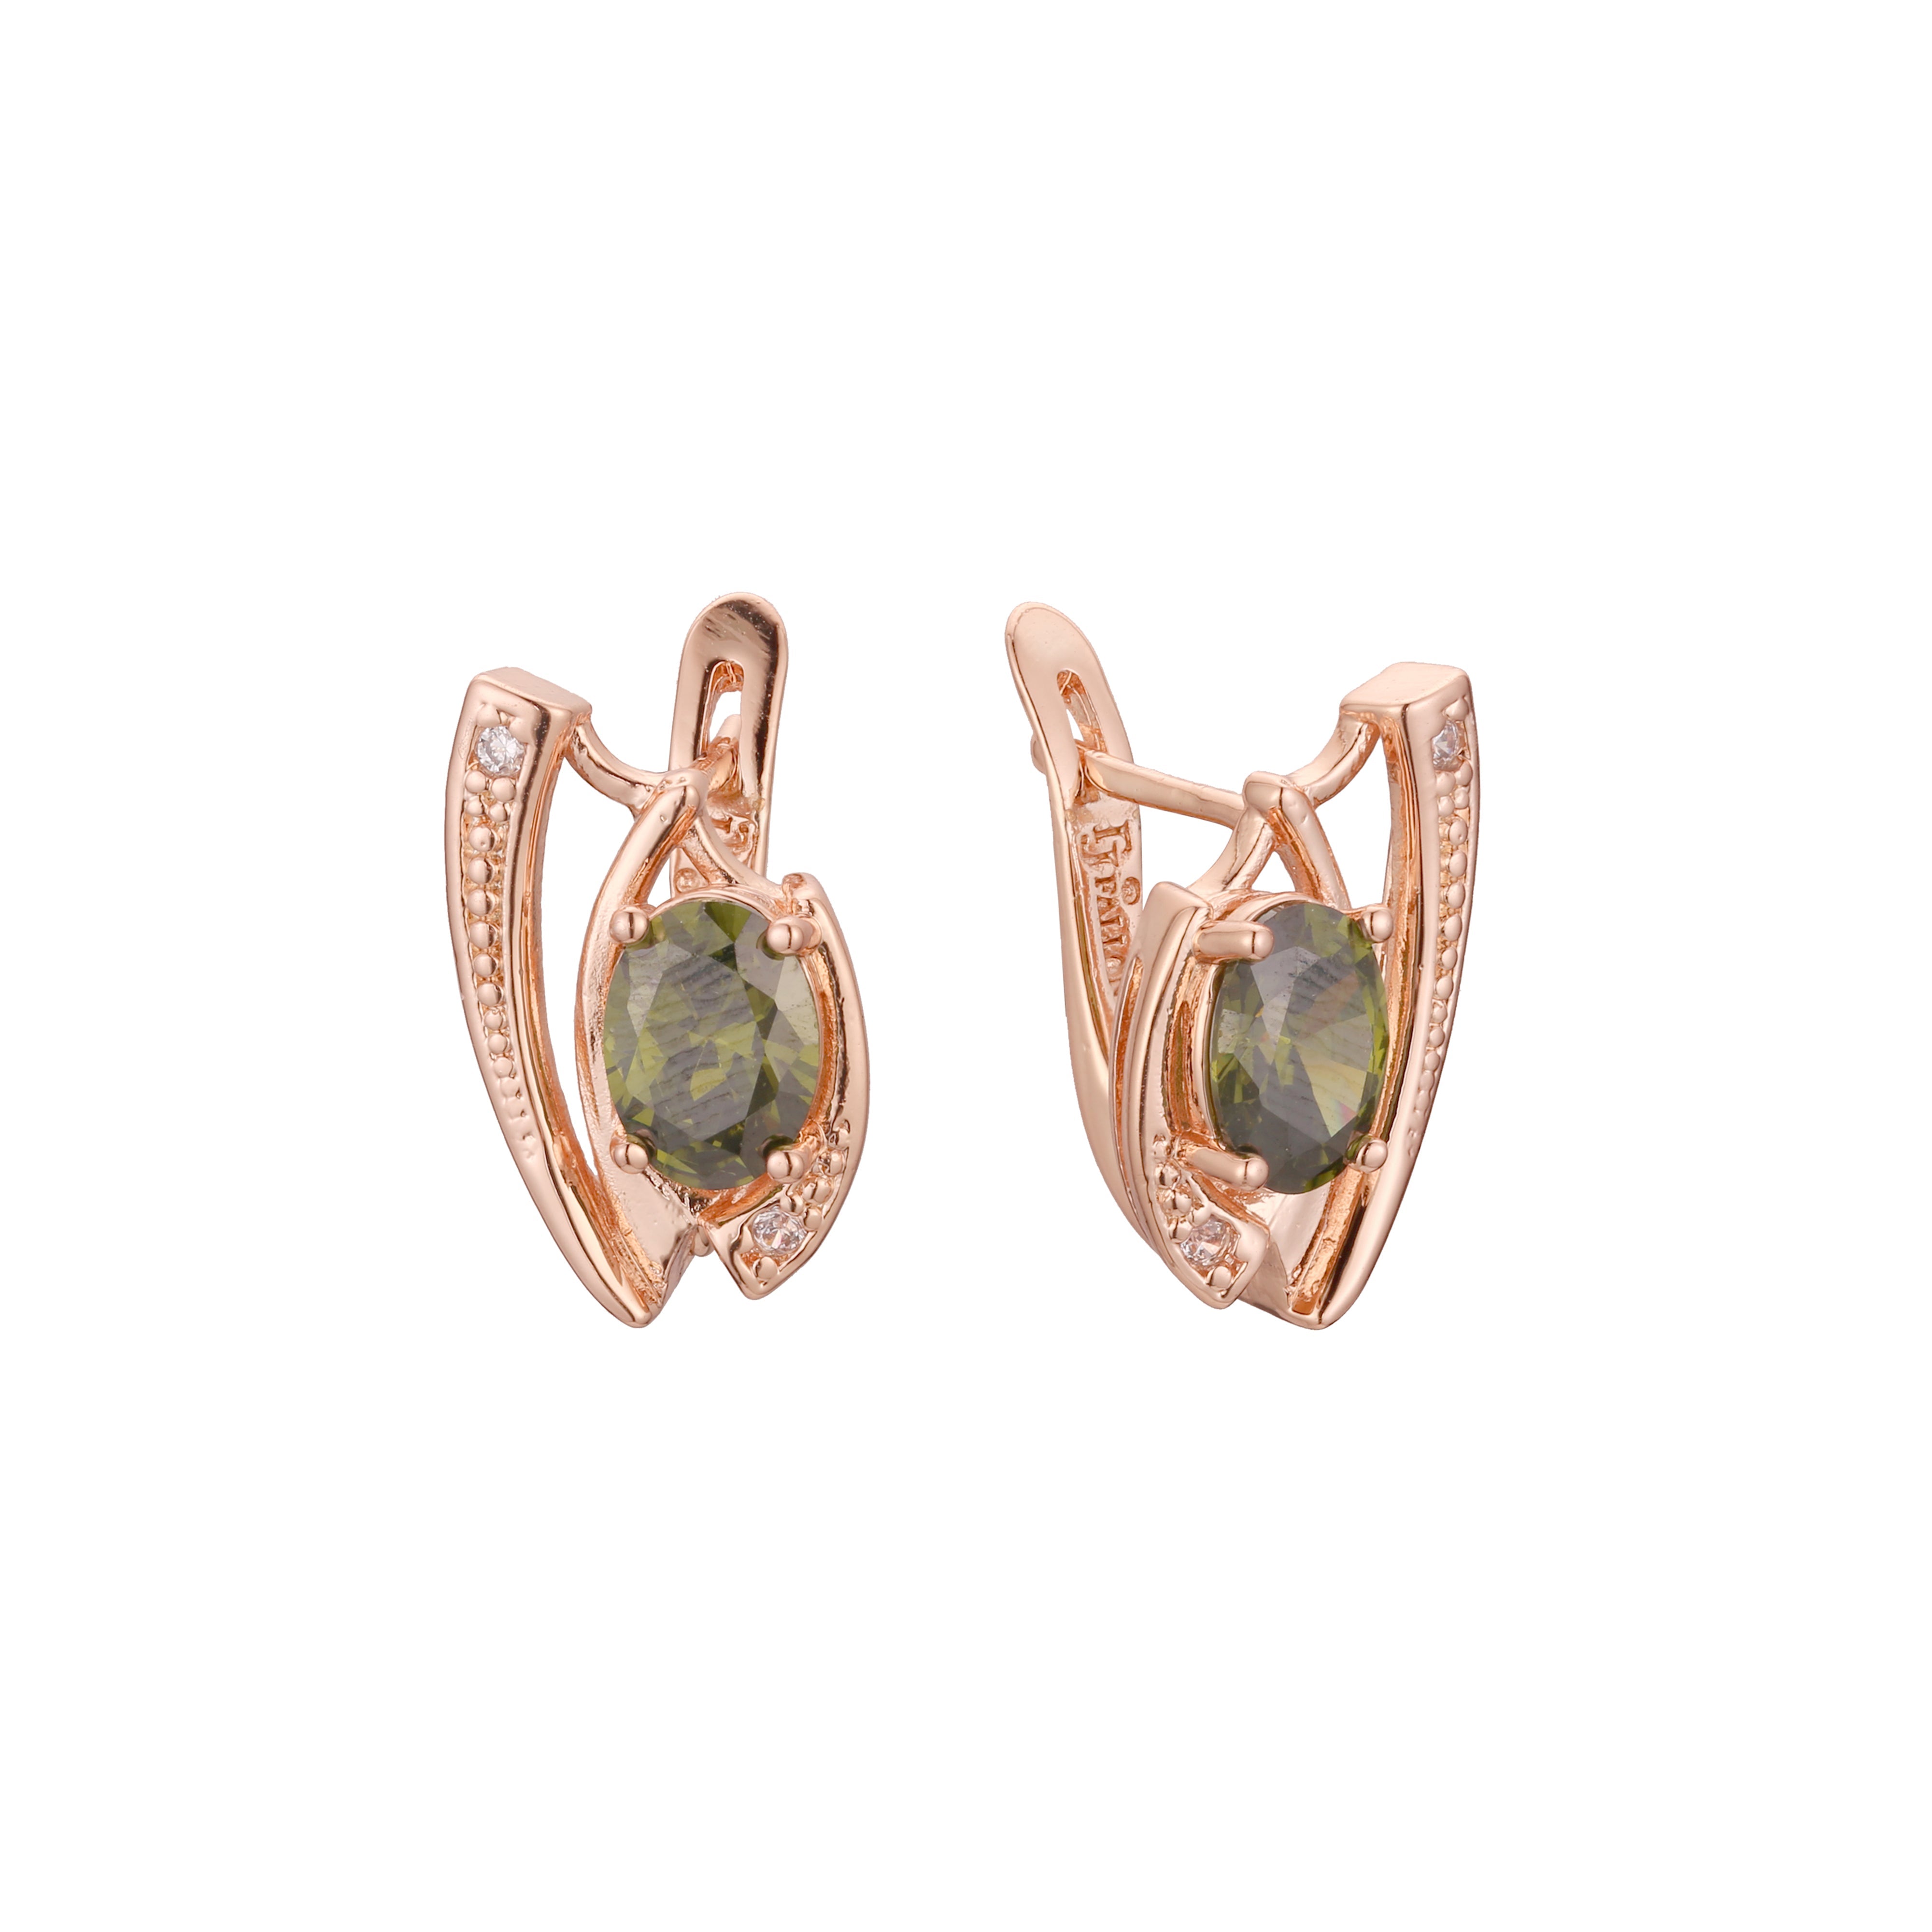 Solitaire big stone earrings in 14K Gold, Rose Gold plating colors